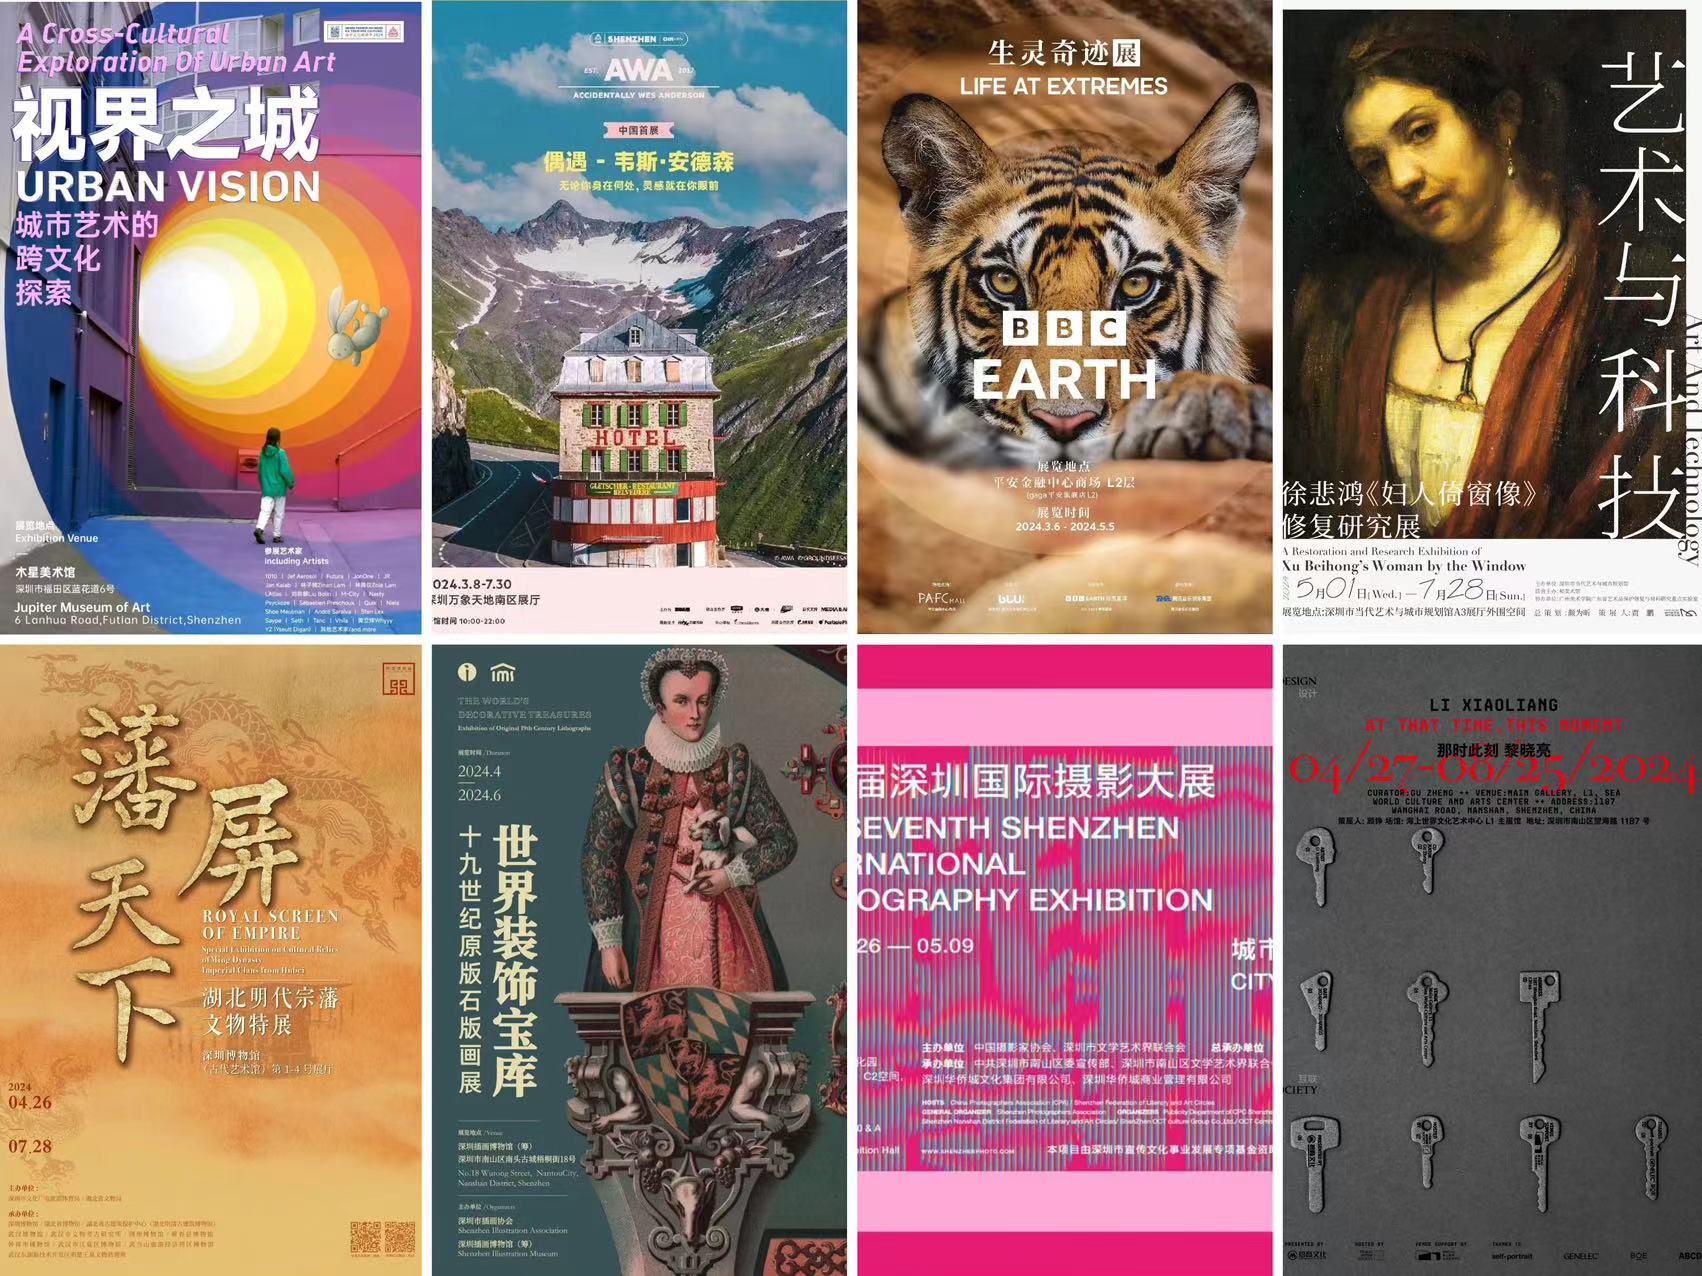 29 Amazing Art Shows This May in Shenzhen